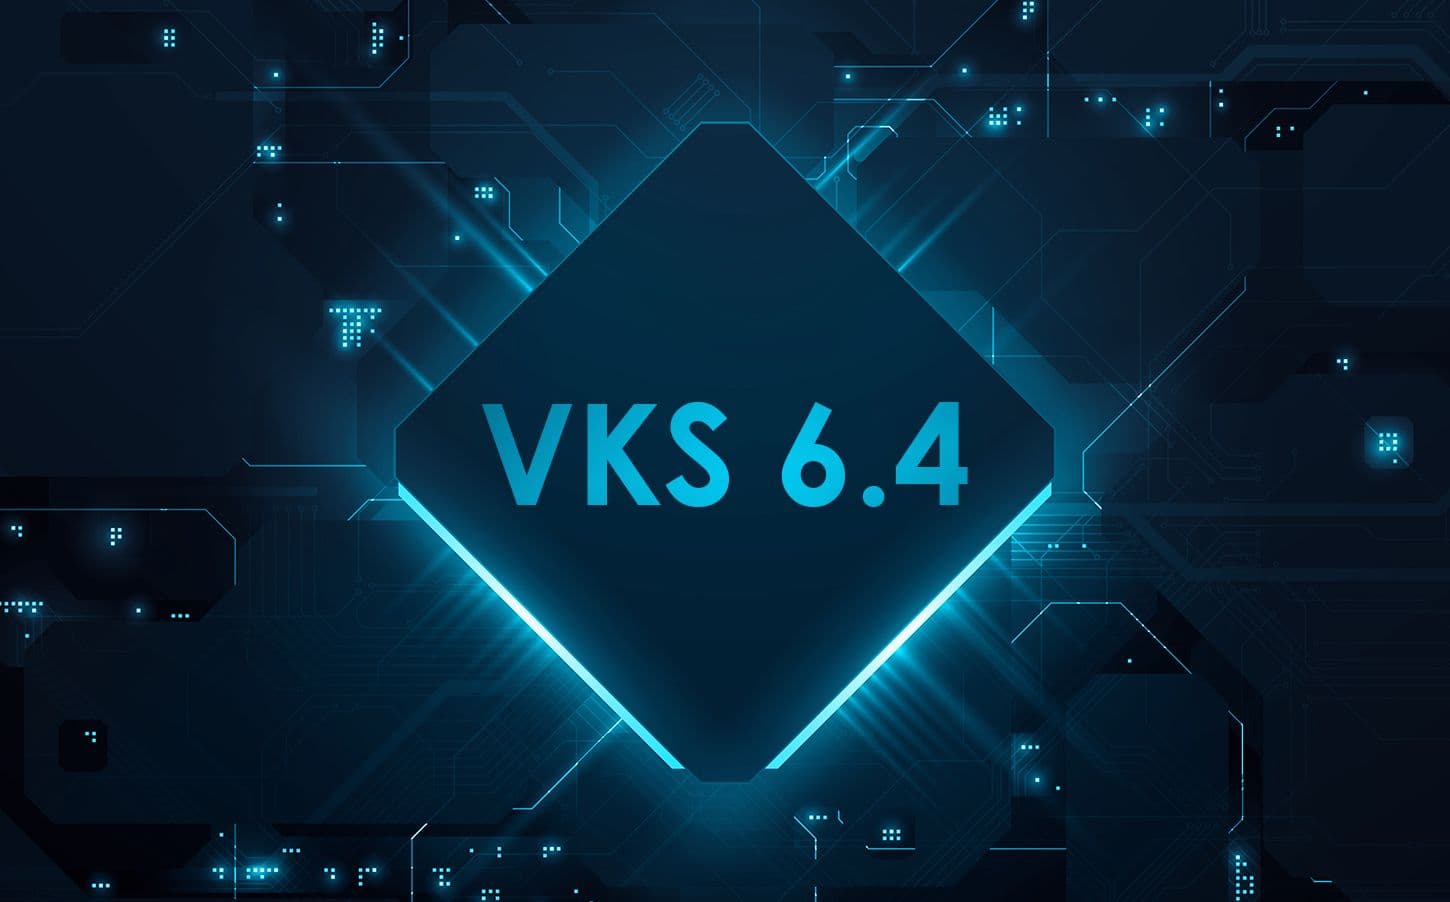 Don't Miss Out on What’s New with the VKS 6.4 Update!